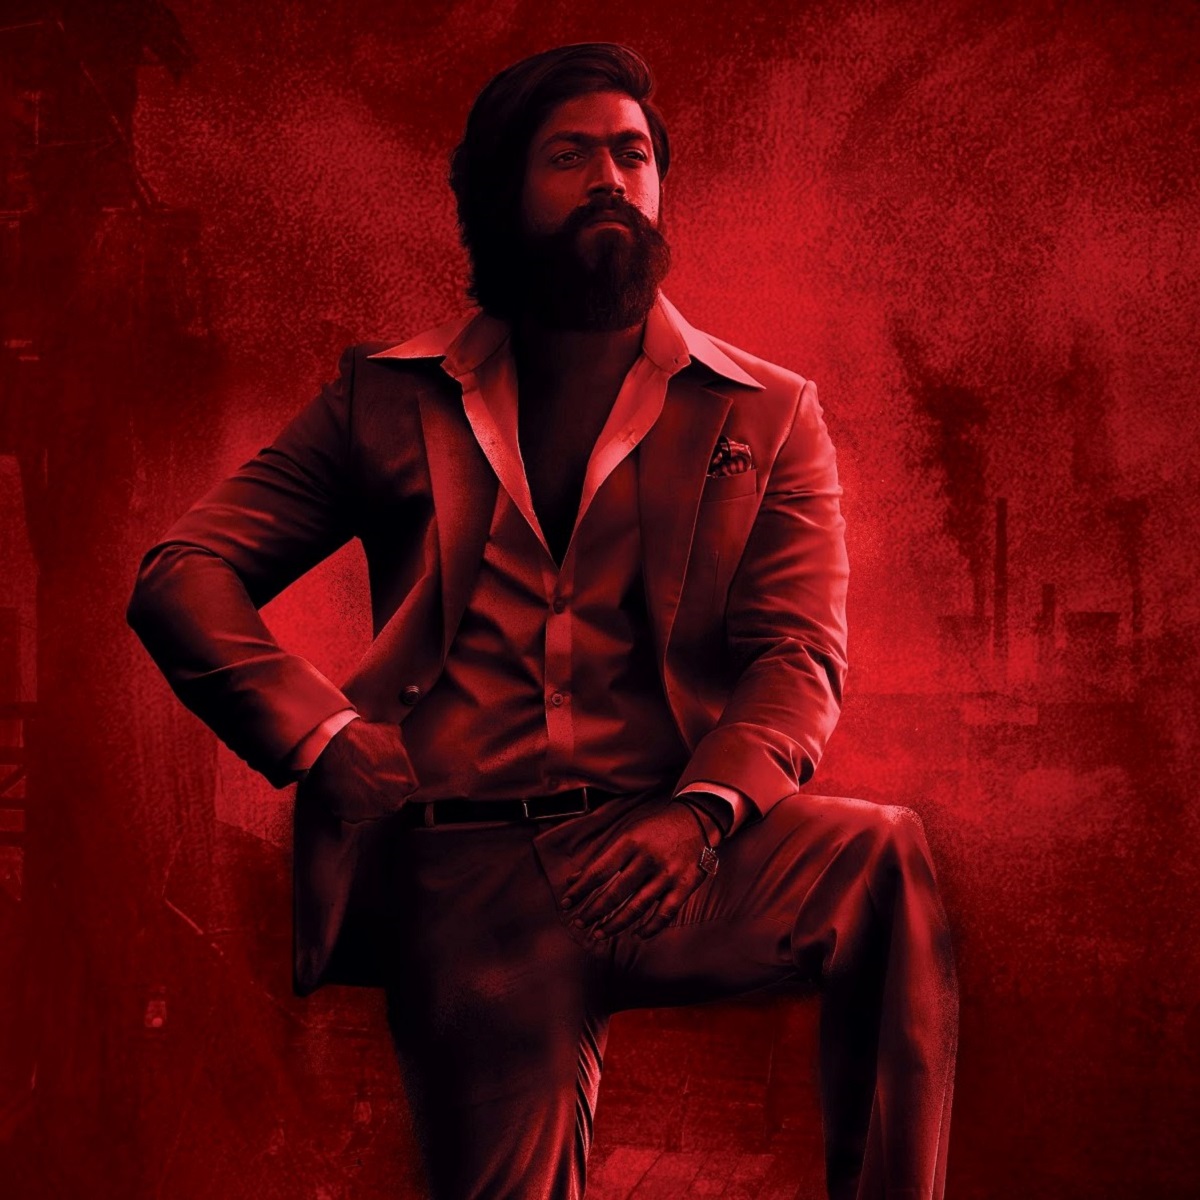 Box Office: KGF Chapter 2 hits $25 million Overseas; Bumper collections in Middle East during Eid